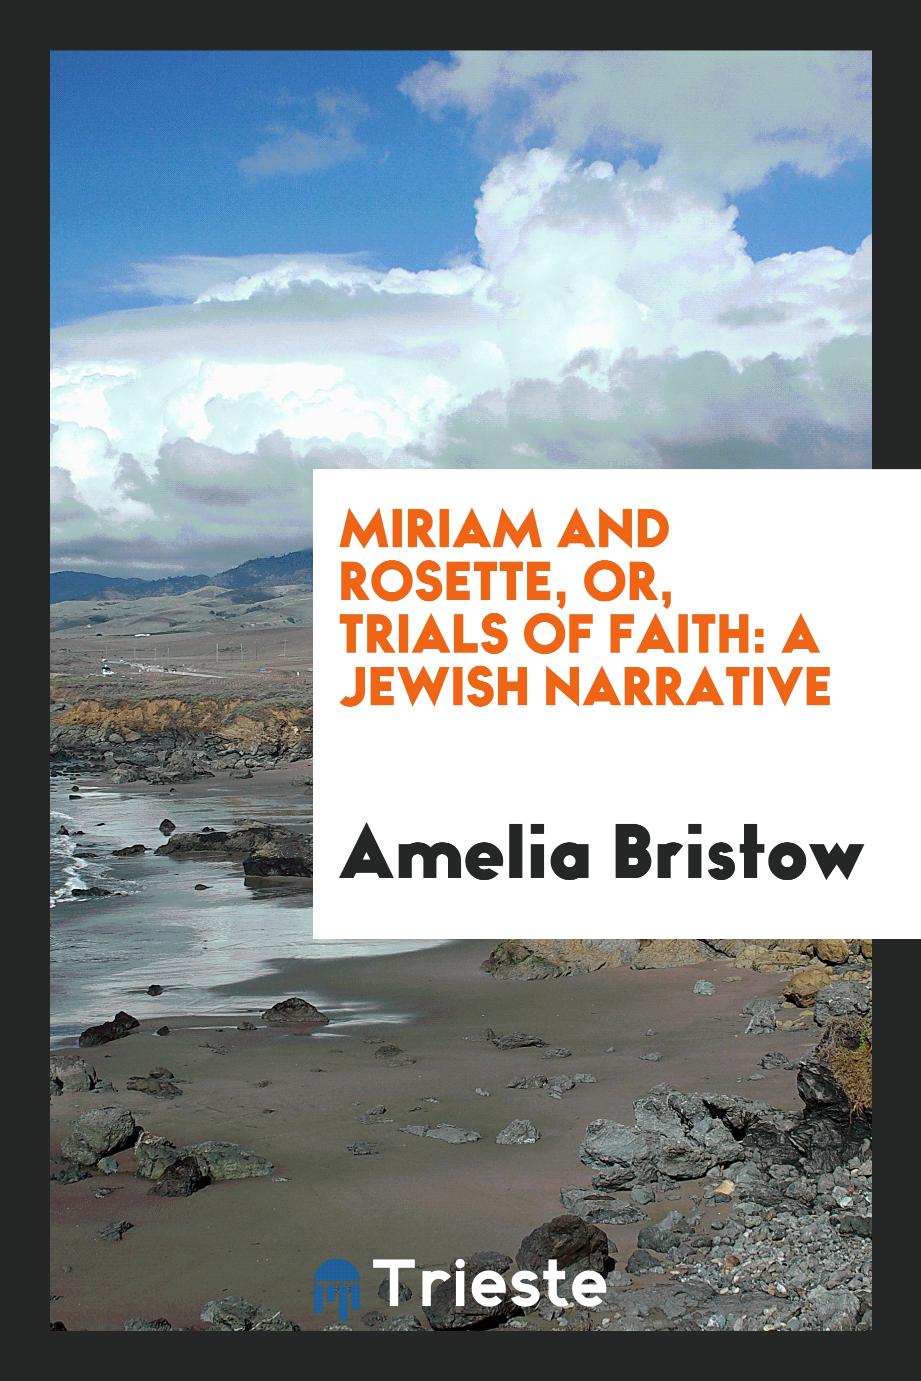 Miriam and Rosette, or, Trials of Faith: A Jewish Narrative